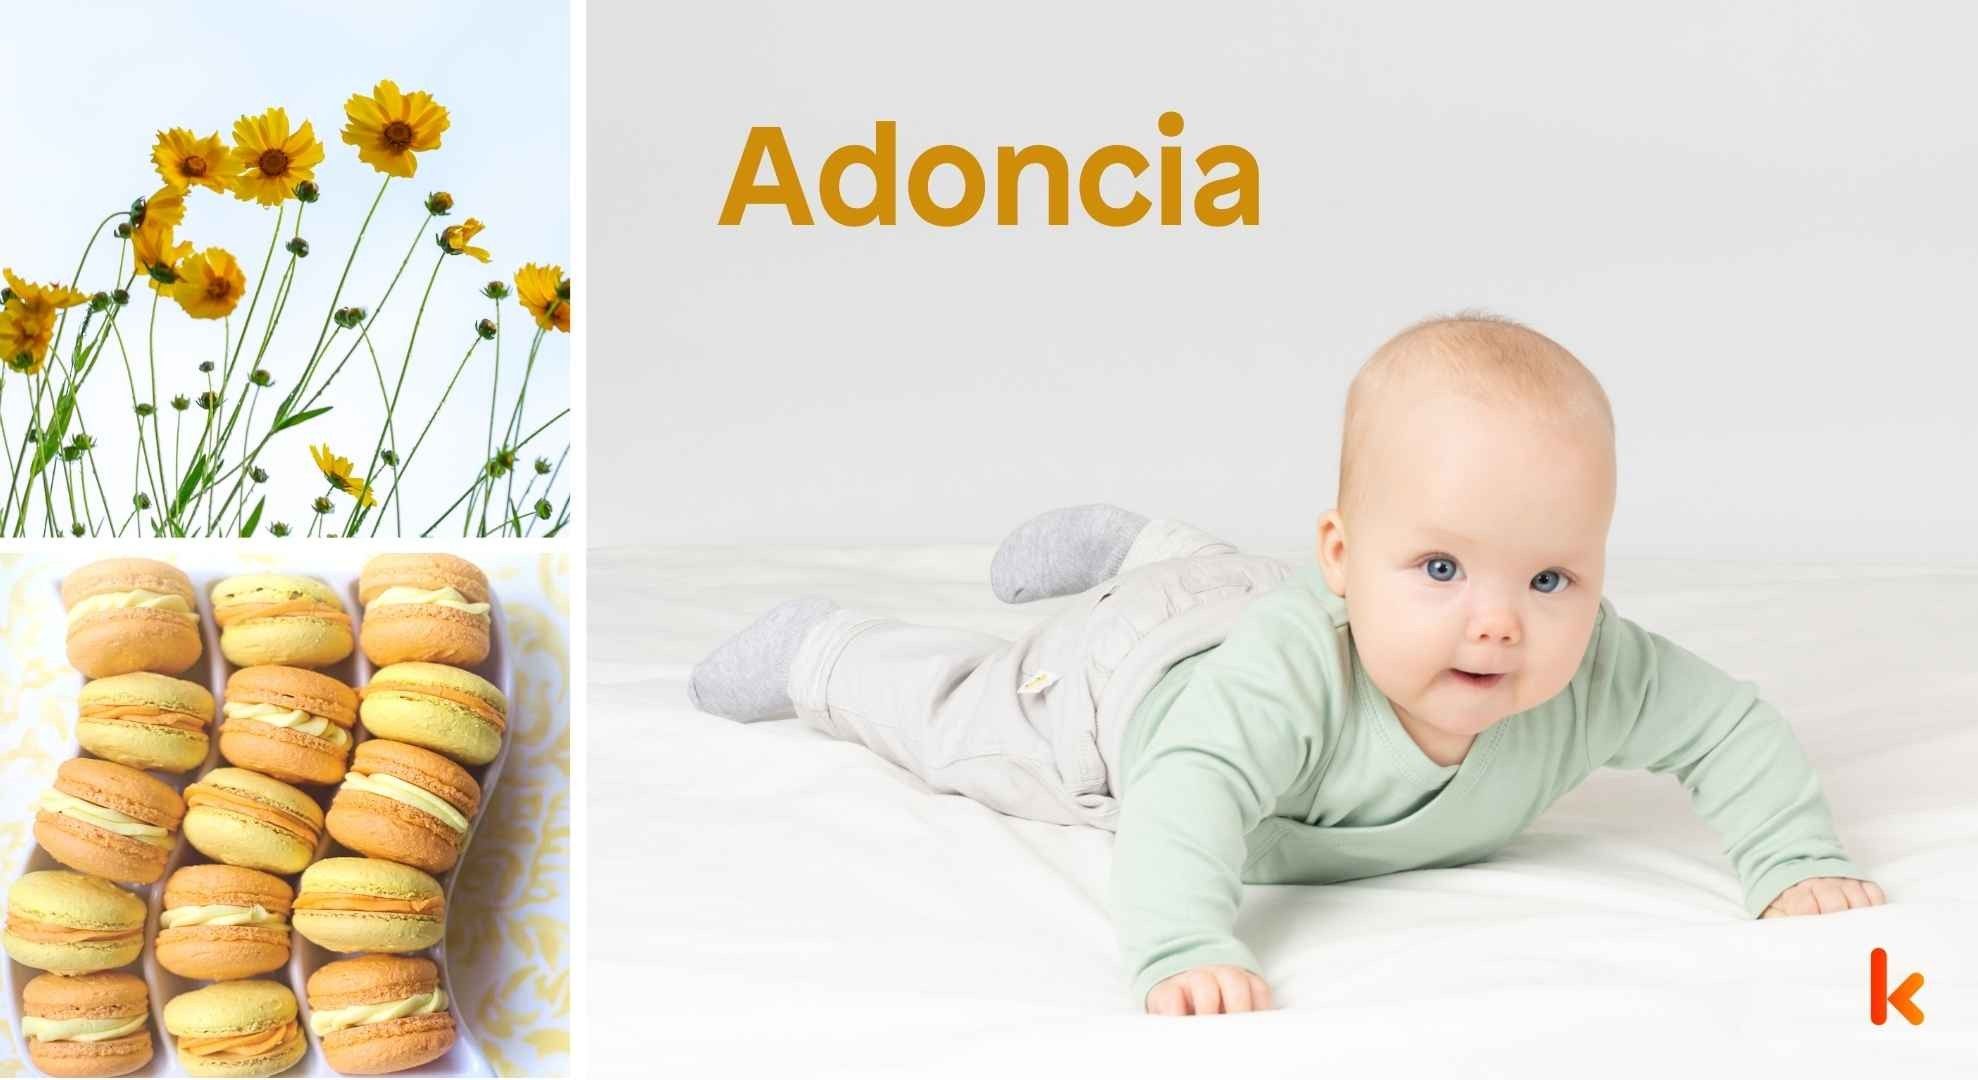 Meaning of the name Adoncia